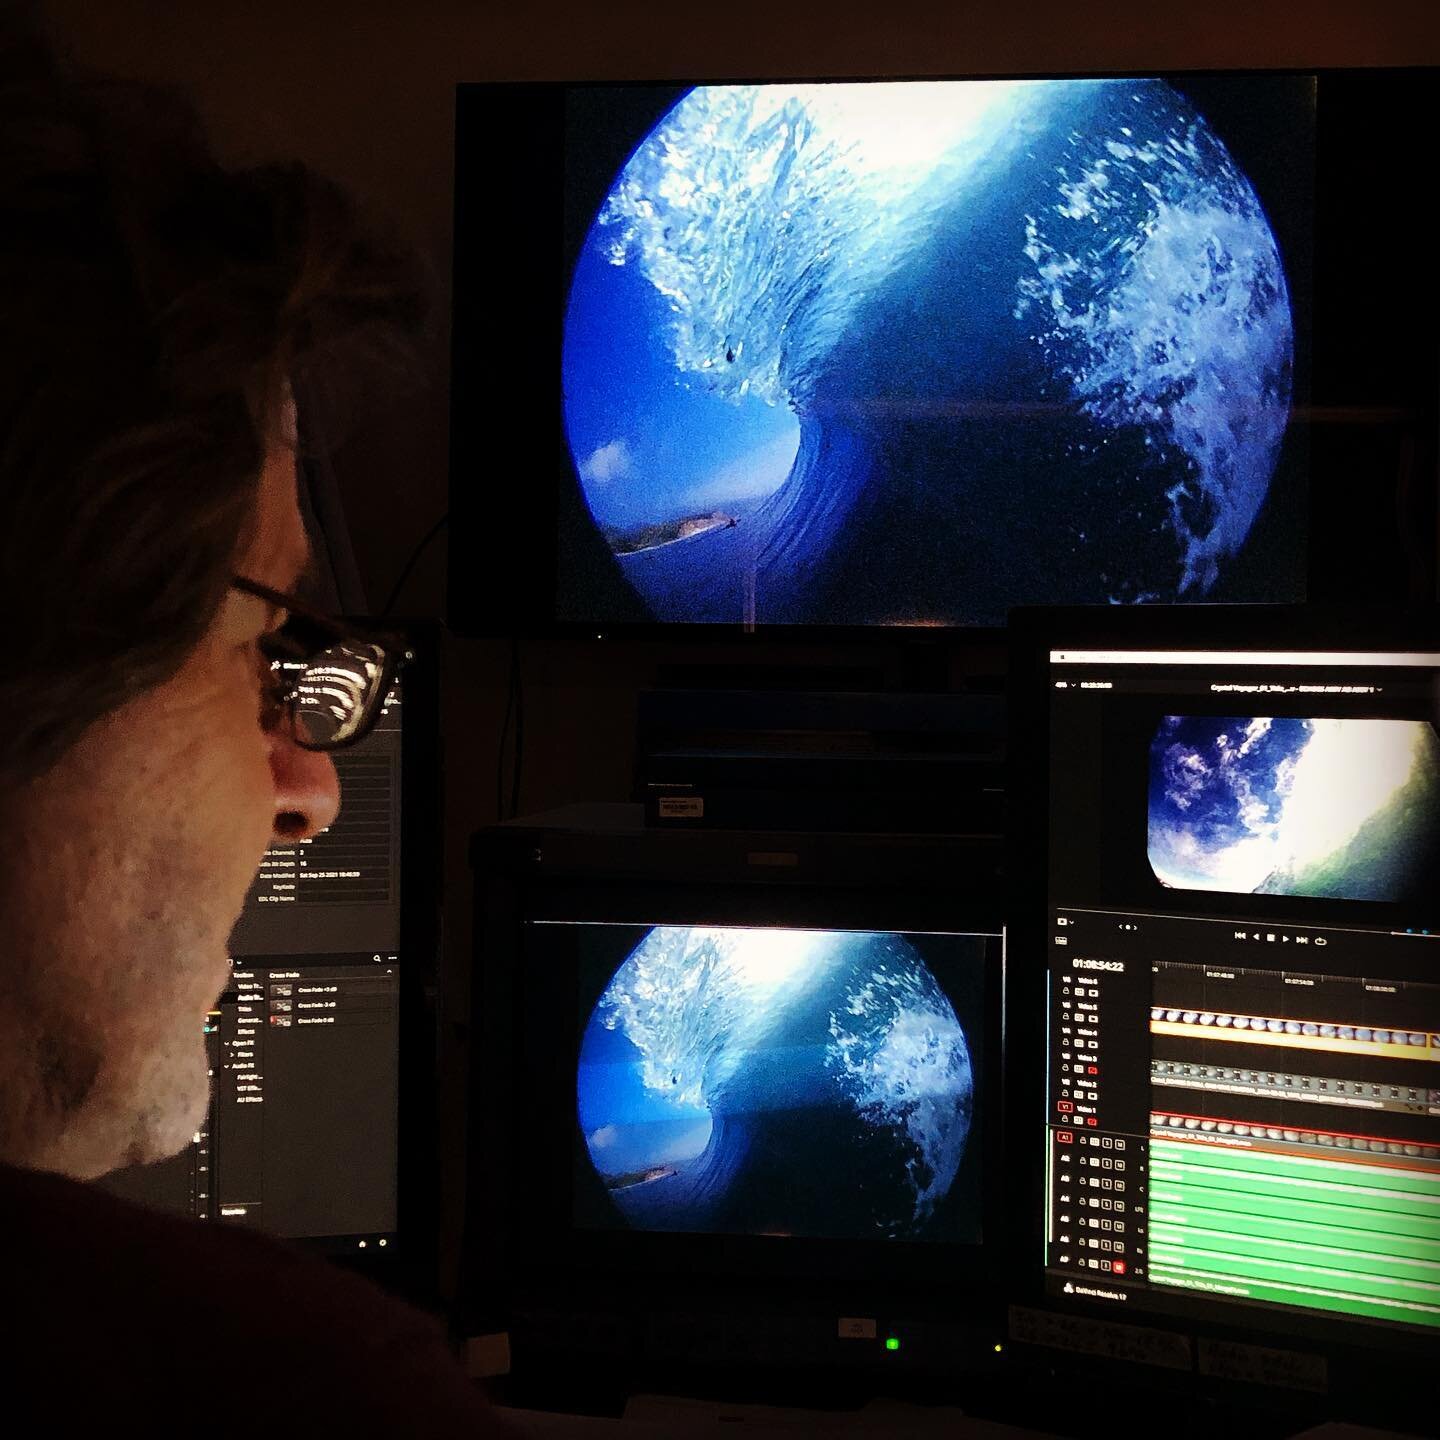 We&rsquo;re back in the transfer suite with @piccoloprods with master of film transfer and post-production Ray Argall. The #echoes original AnB rolls into the Resolve system to be processed to full 4K Cinema release... looking incredible 50 years sin